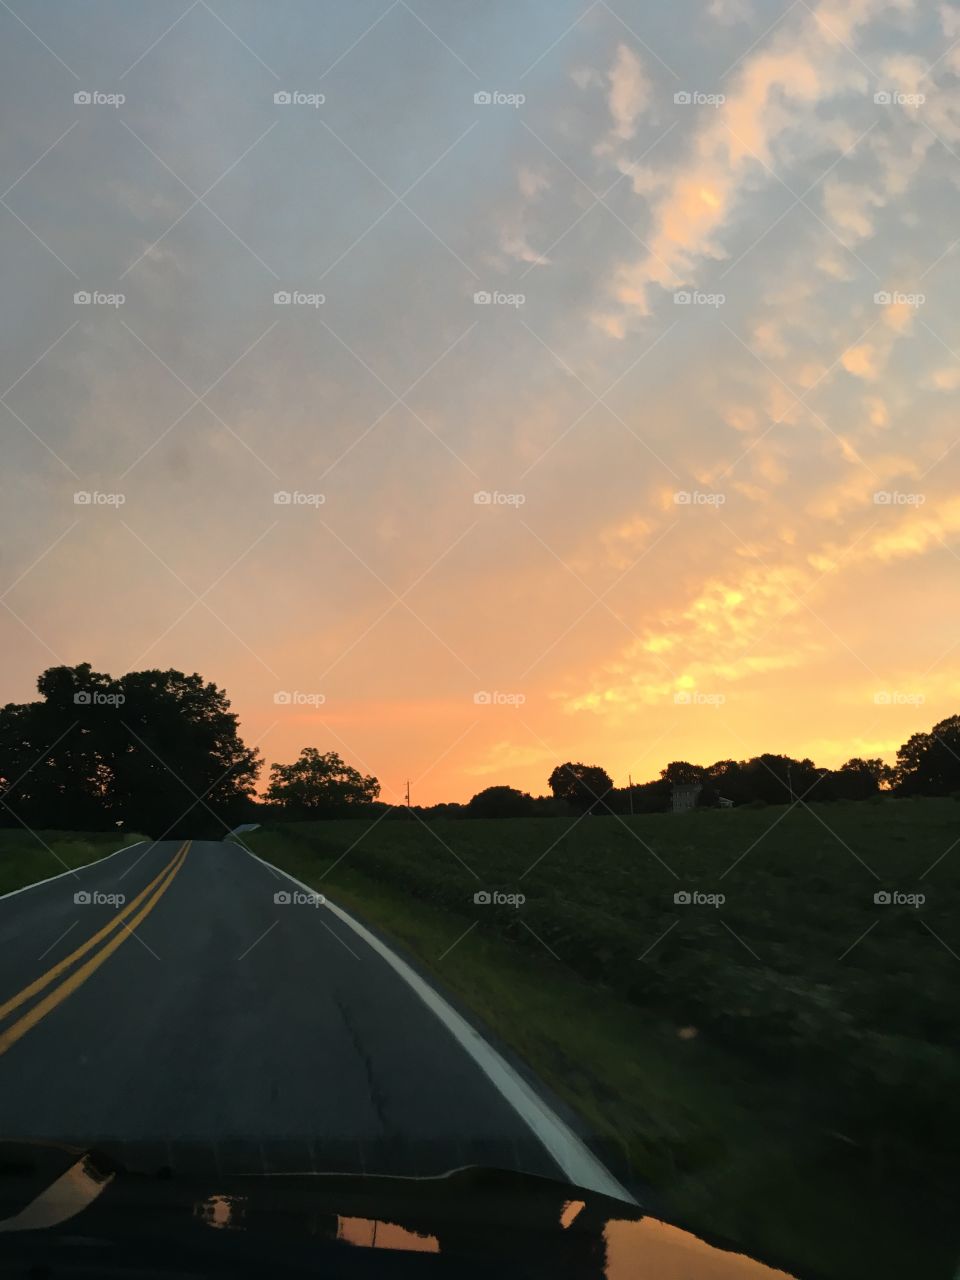 Golden sunset on the road 